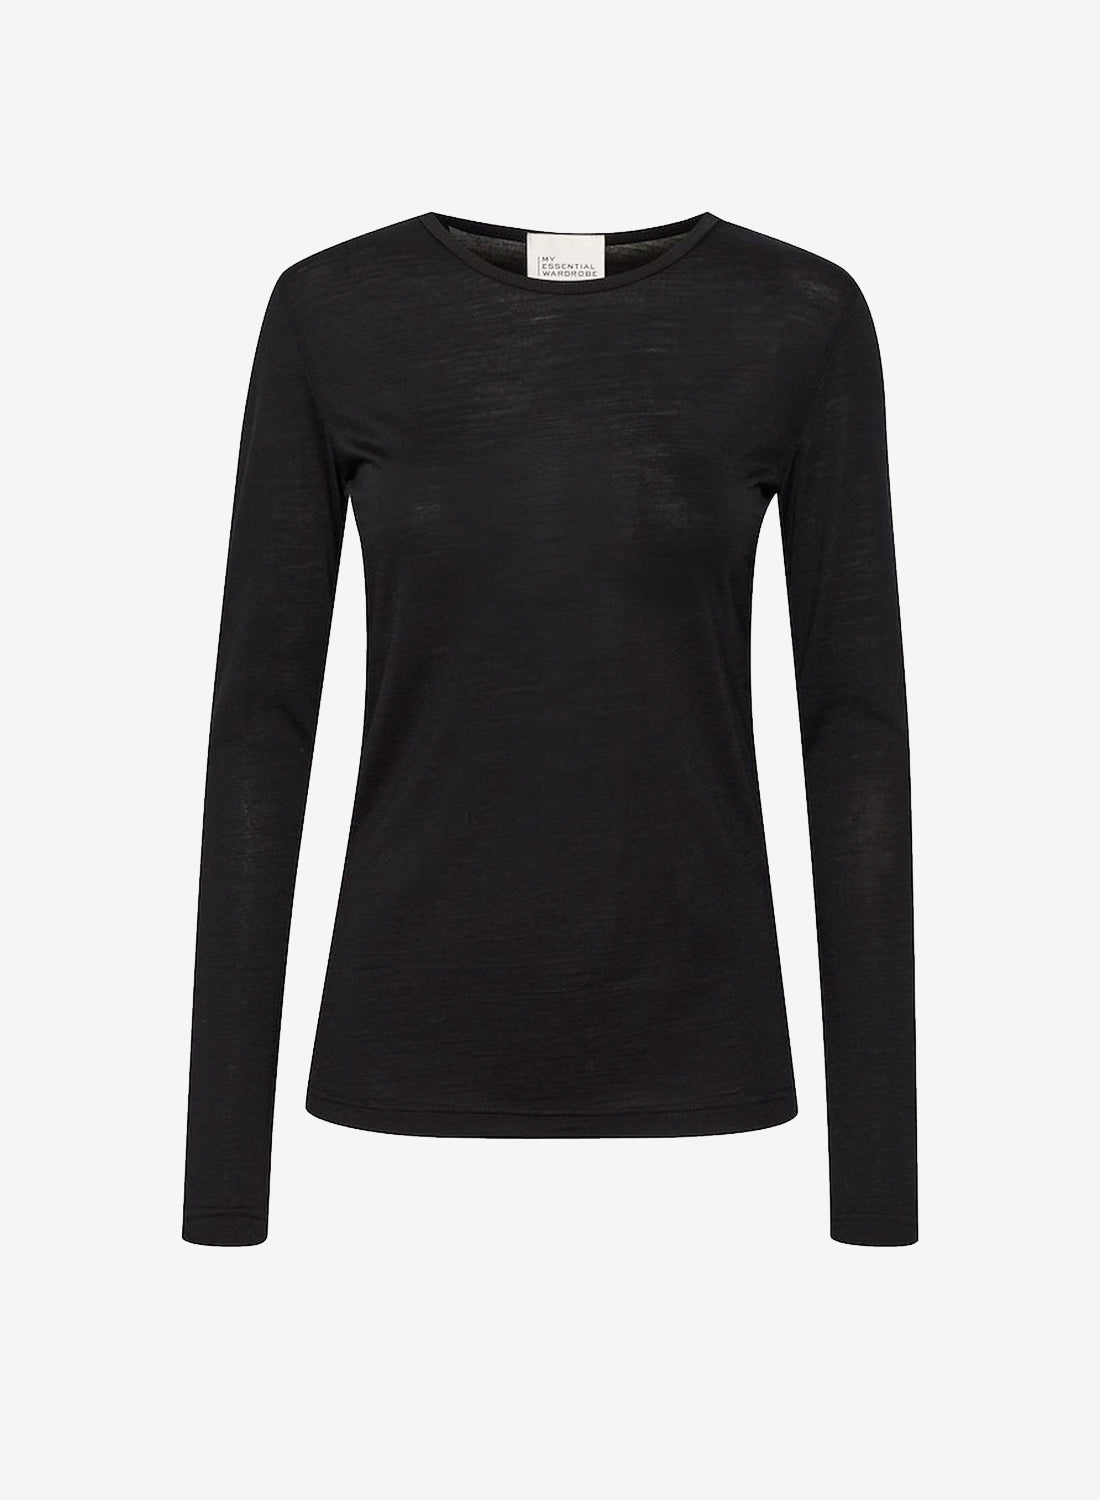 My Essential Wardrobe The Oneck Long Sleeve Black